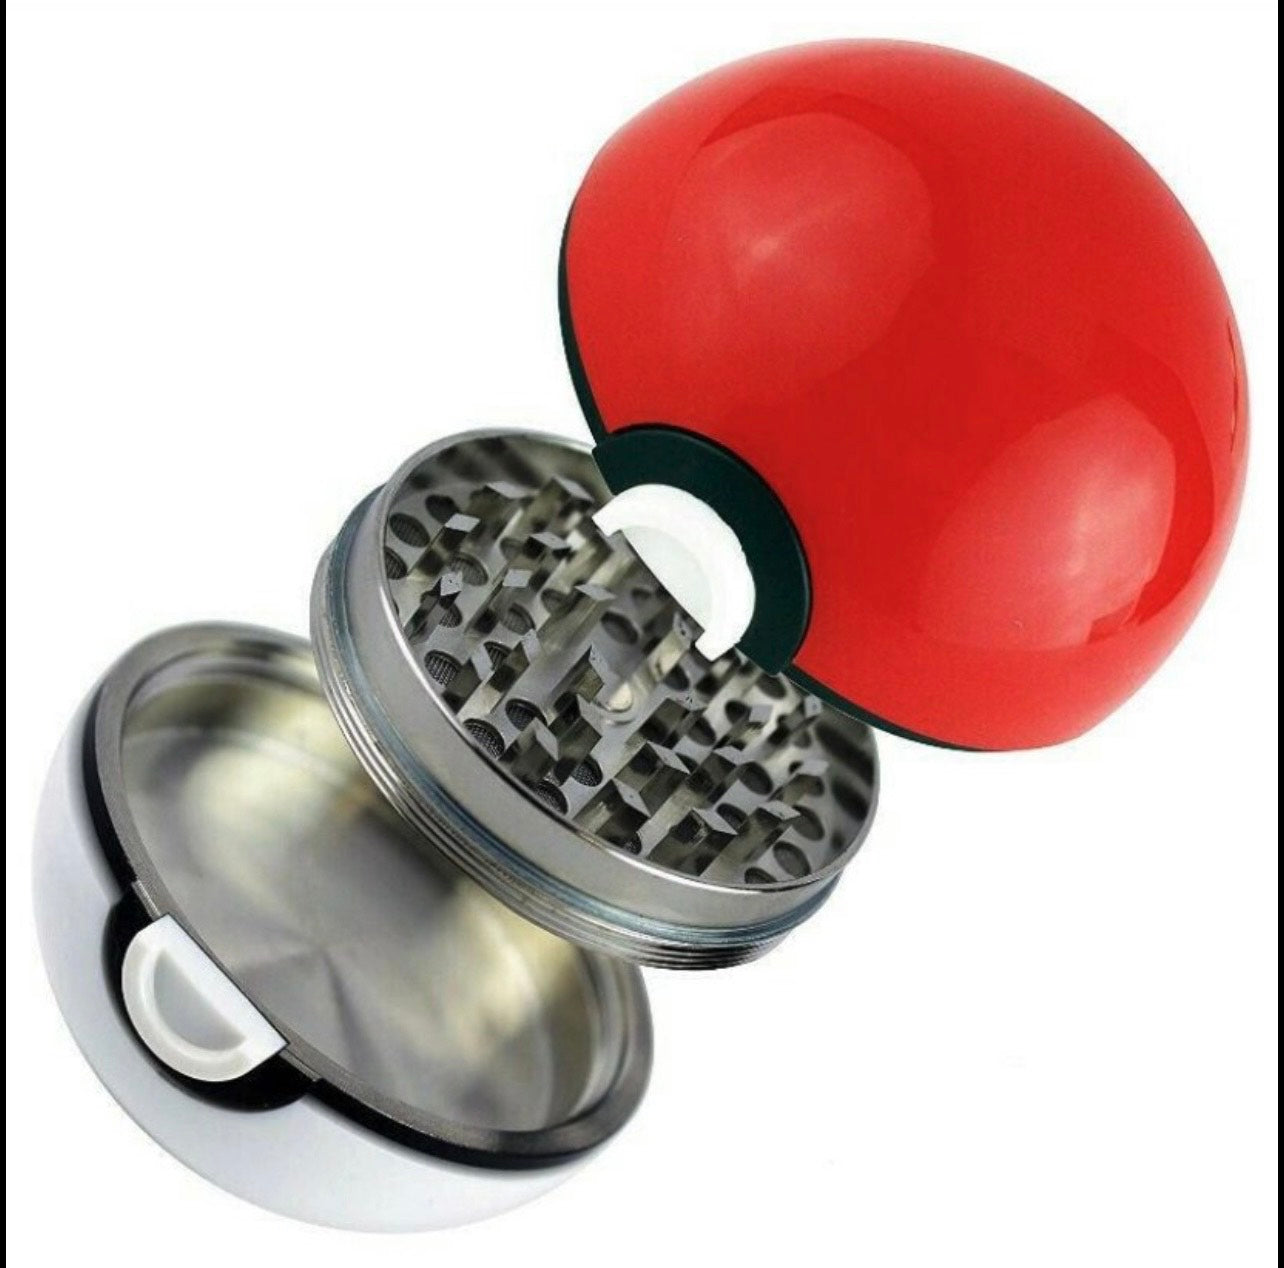 Anime Pokeball Grinder For Herbs and Spices - Pikachu Charizard gift Collectable catchem kitchen. Crusher